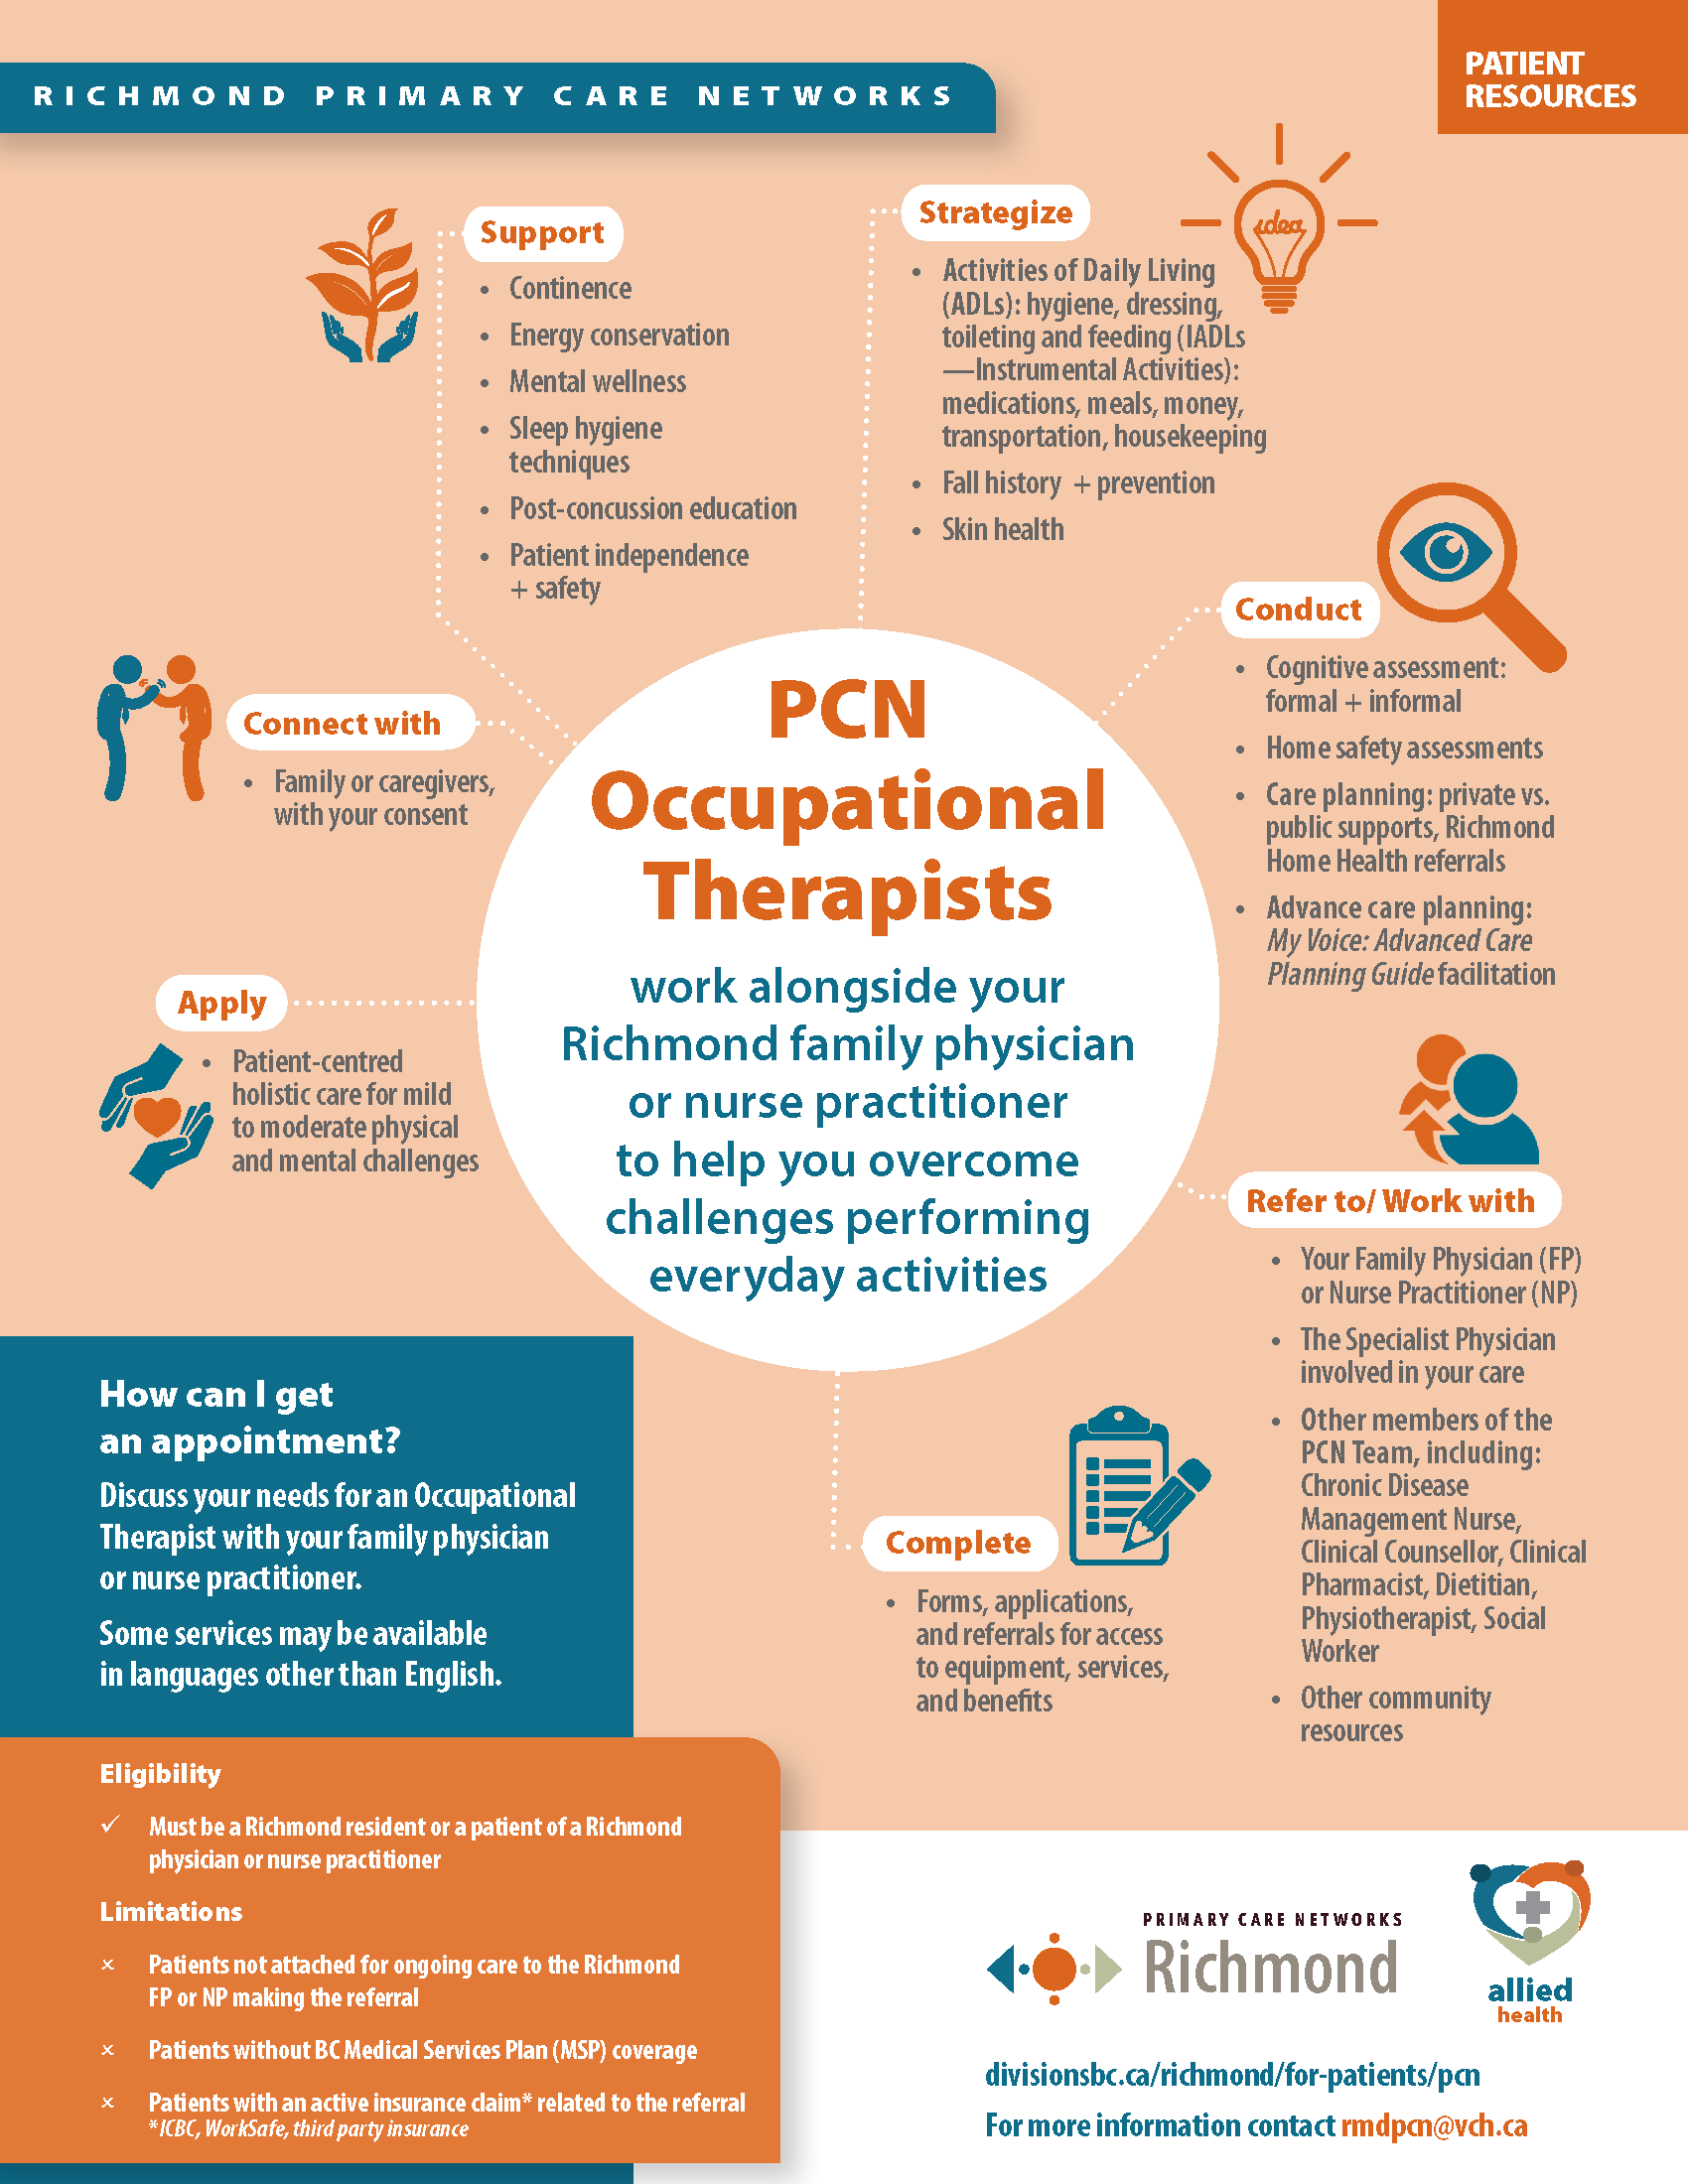 PCN Occupational Therapists - overview (patient handout).png